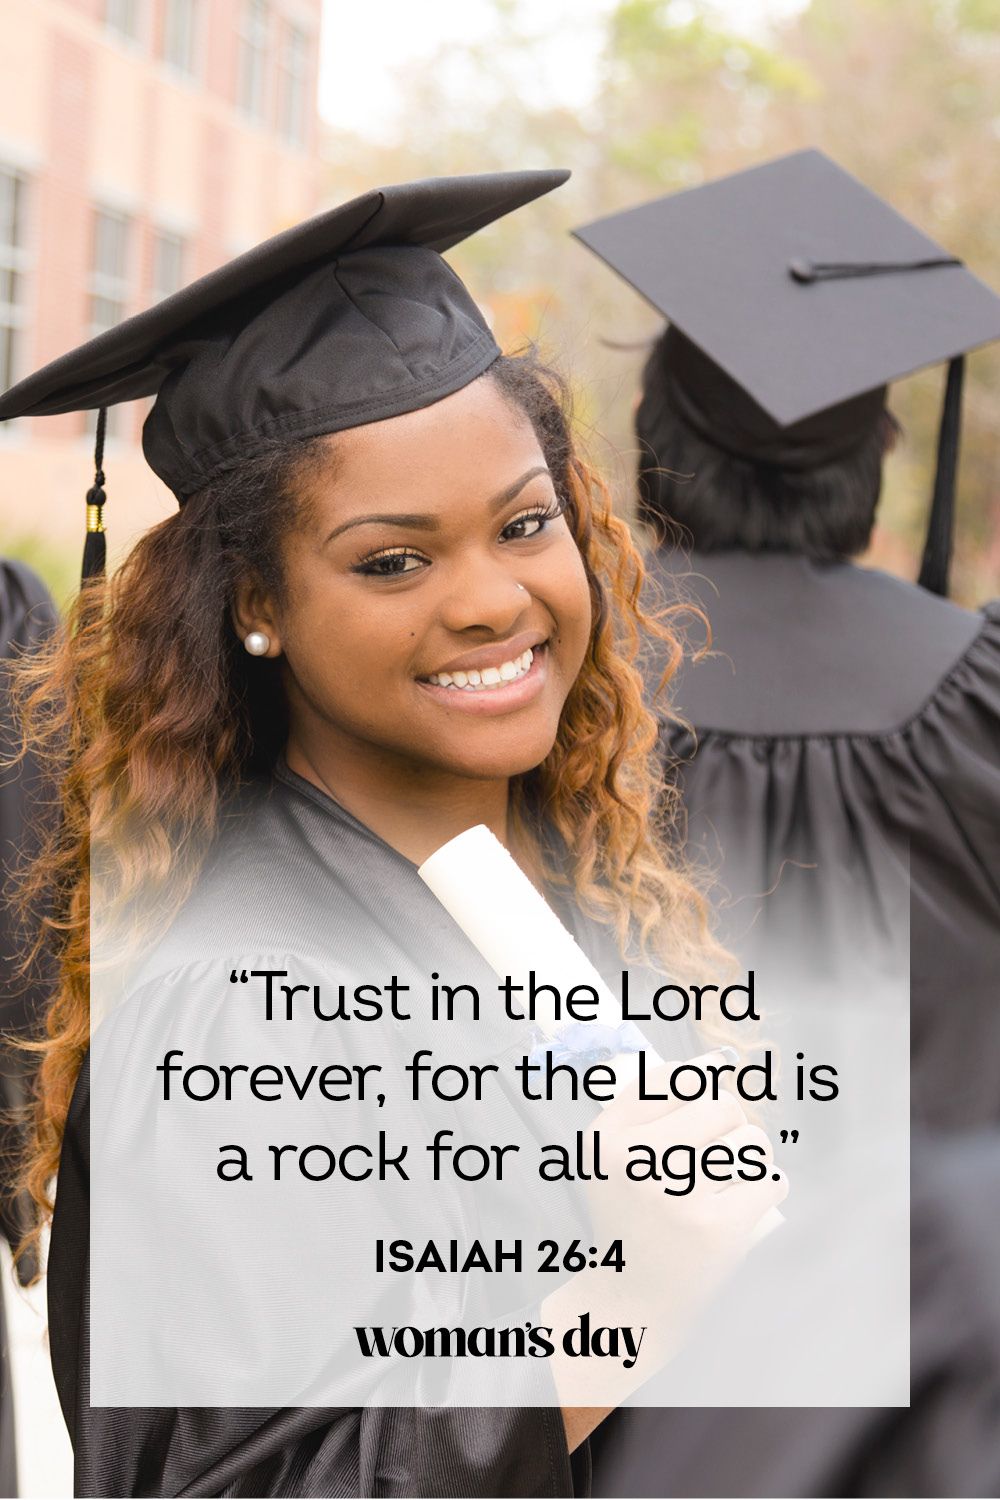 religious graduation quotes and sayings